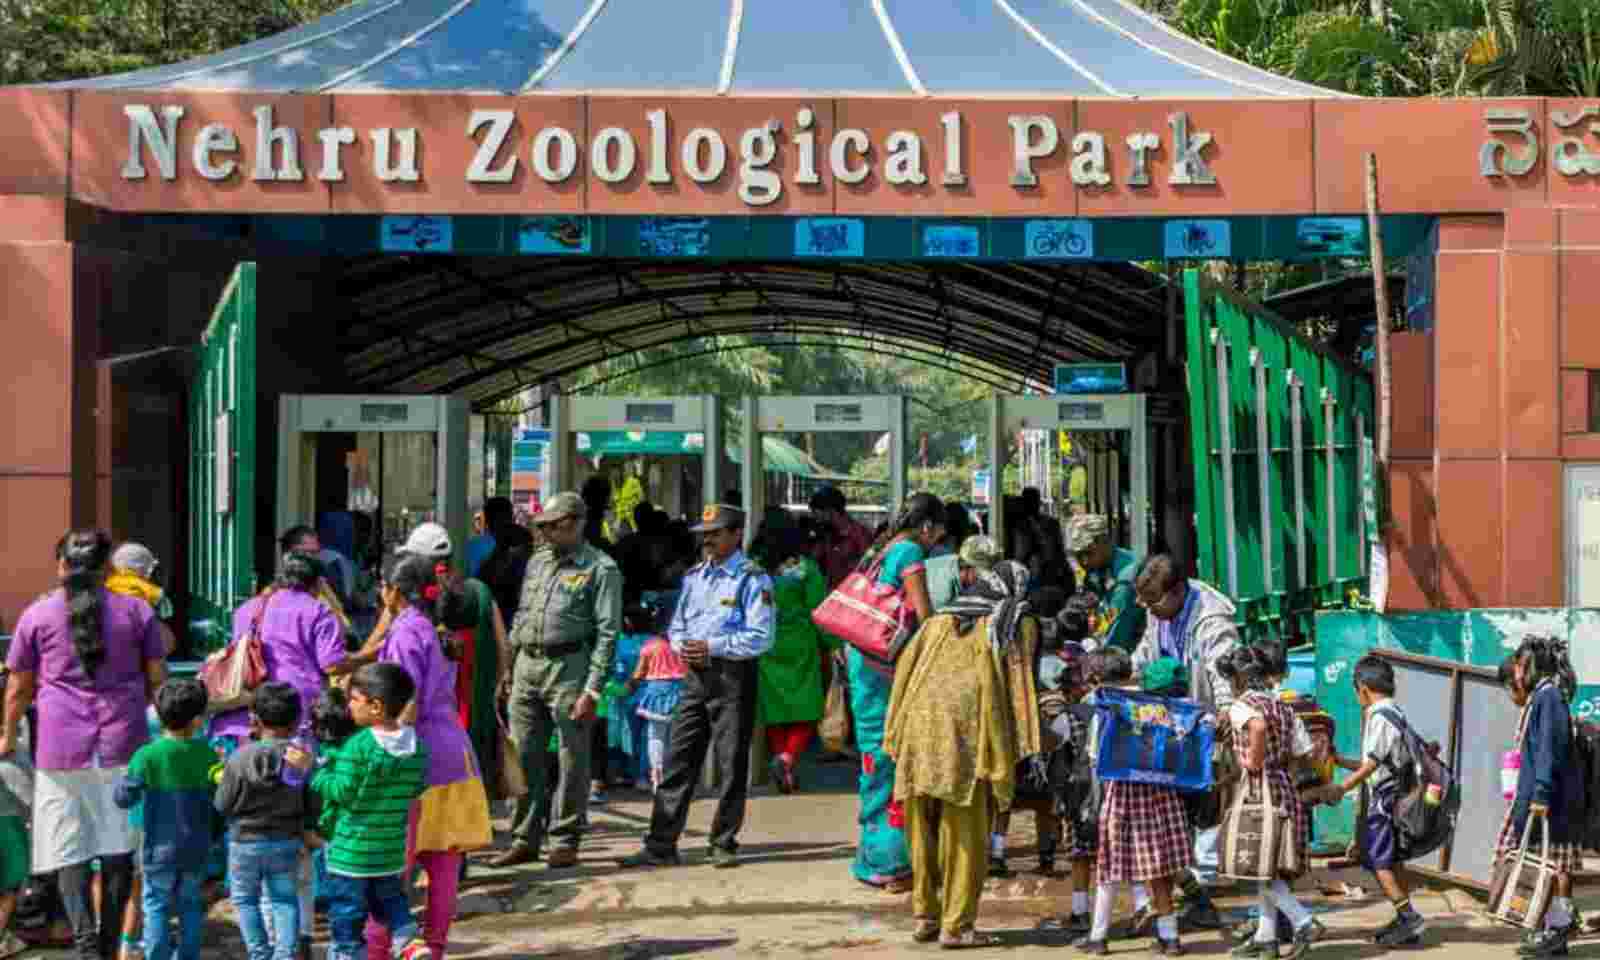 Thanks To Organic Feed: Nehru Zoological Park of Hyderabad inmates grow  healthier, stronger